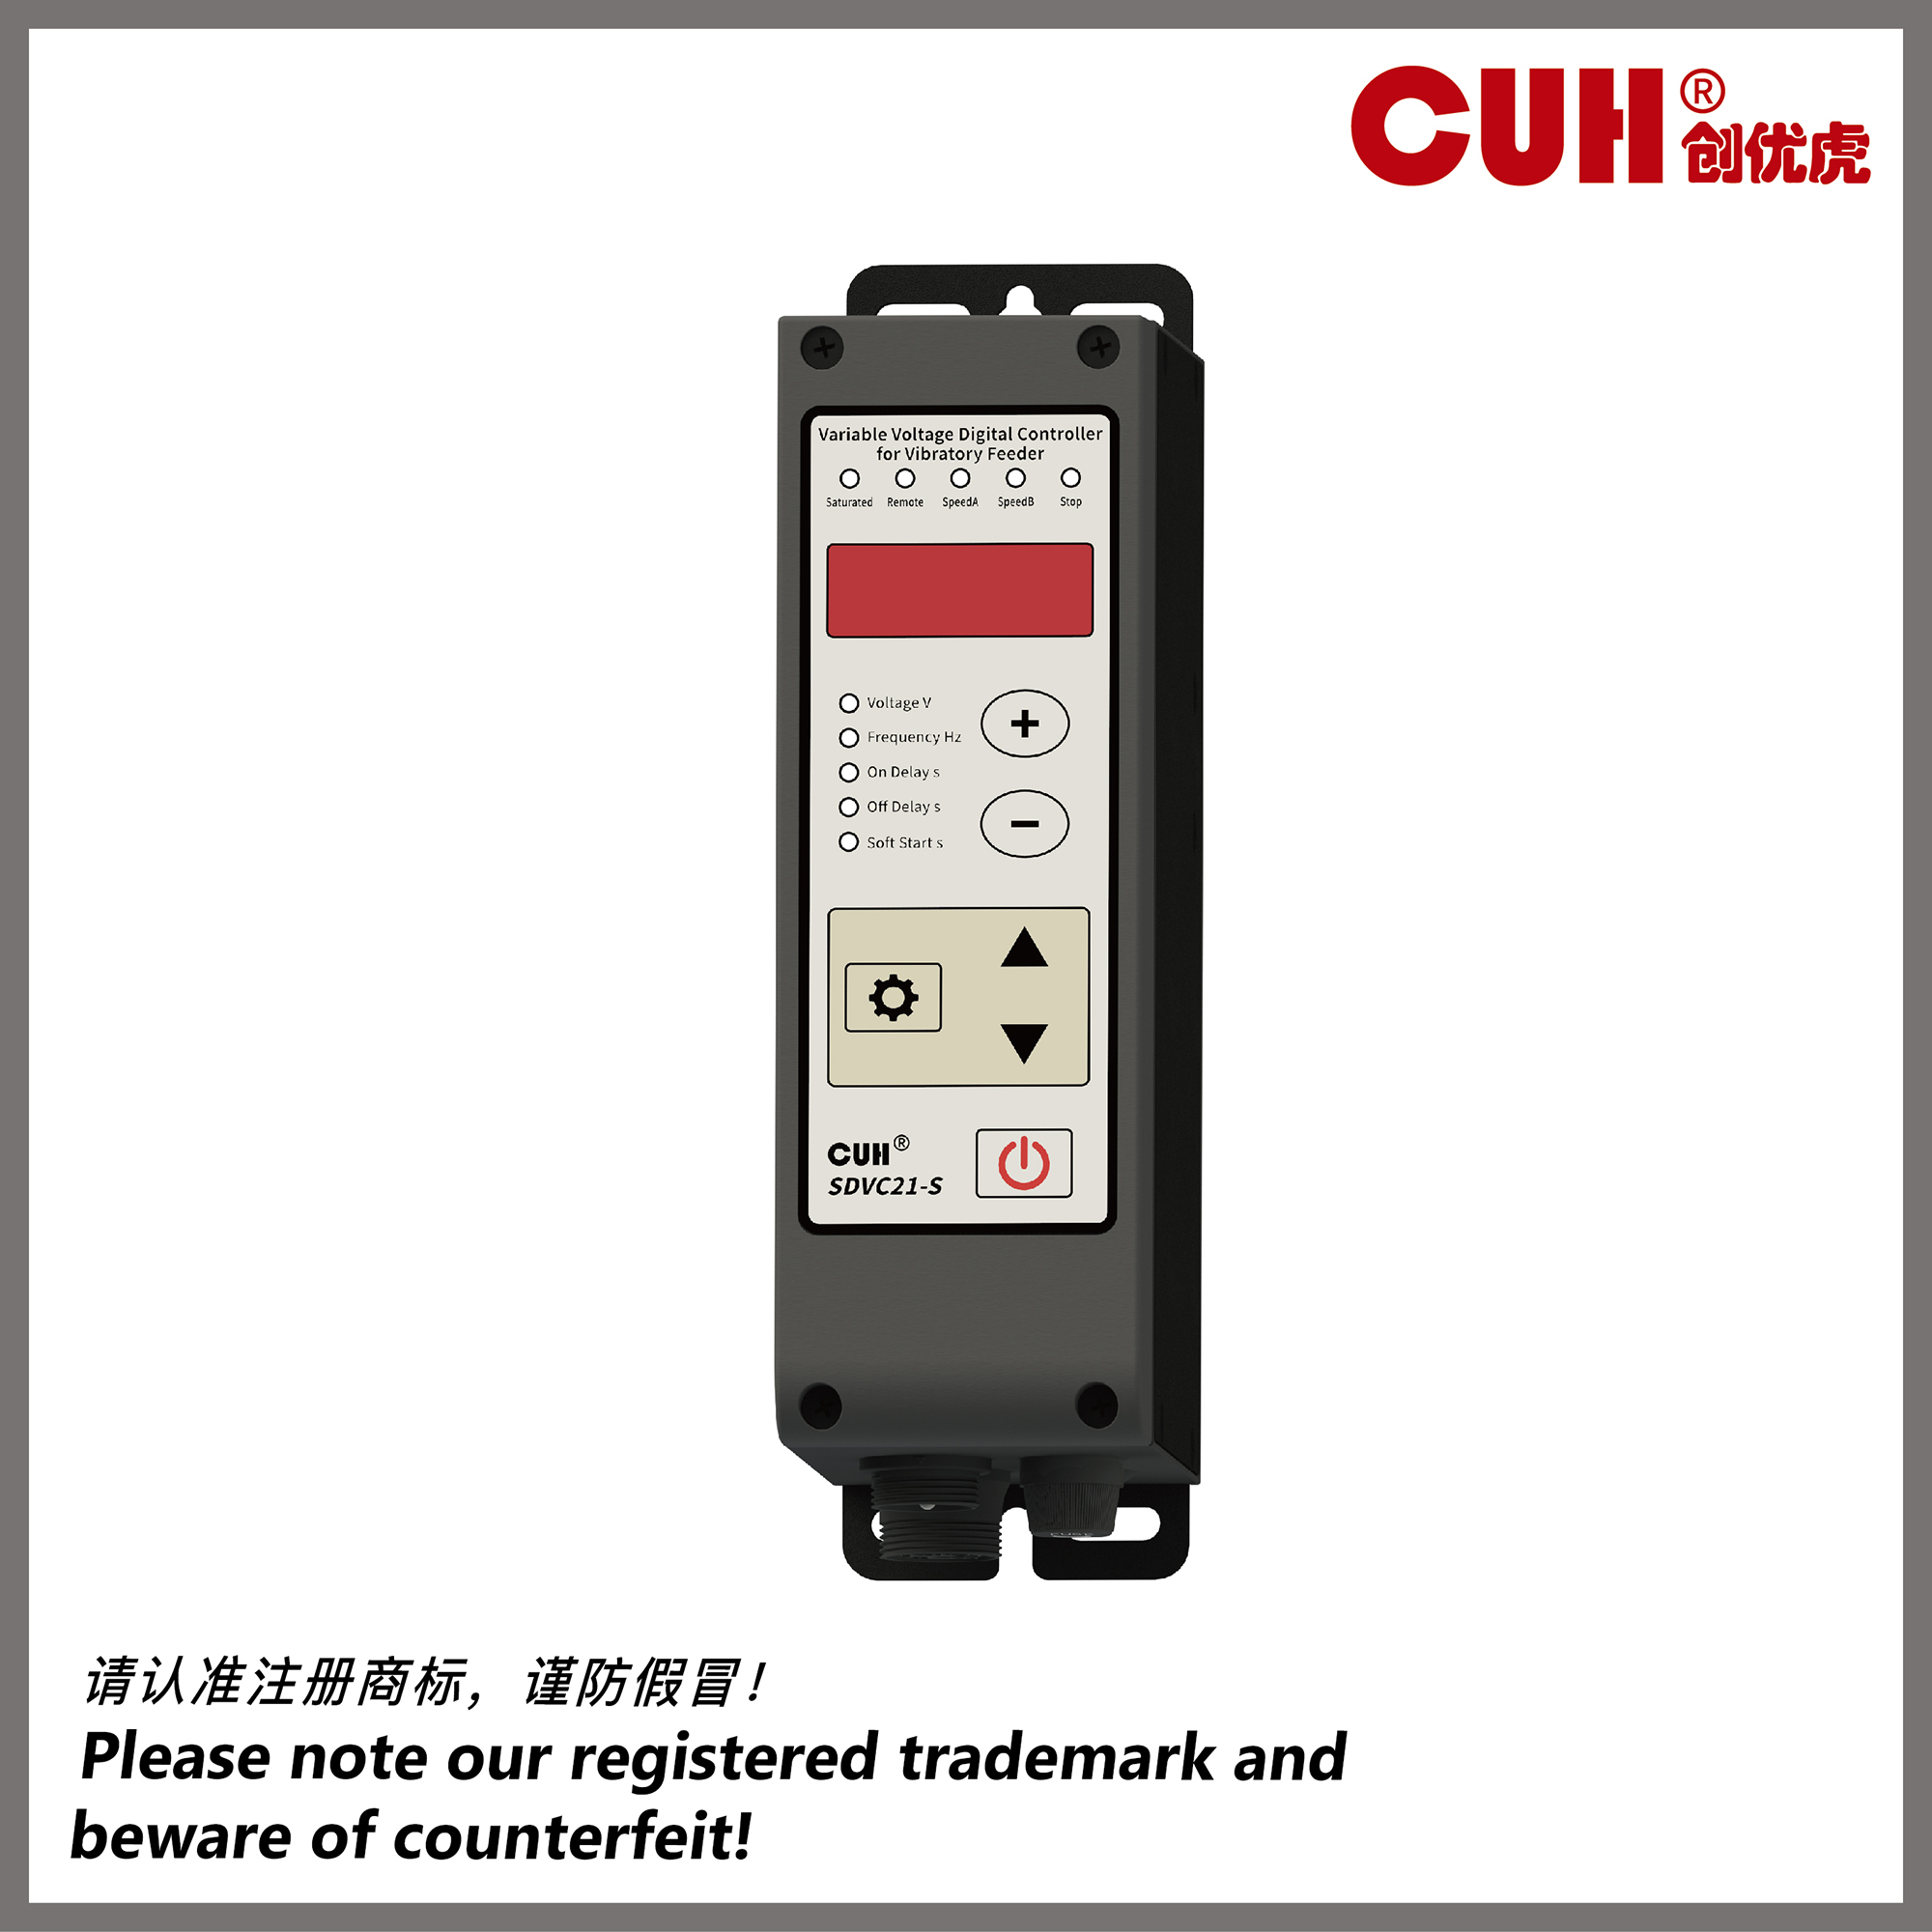 CUH feeder Control-product details